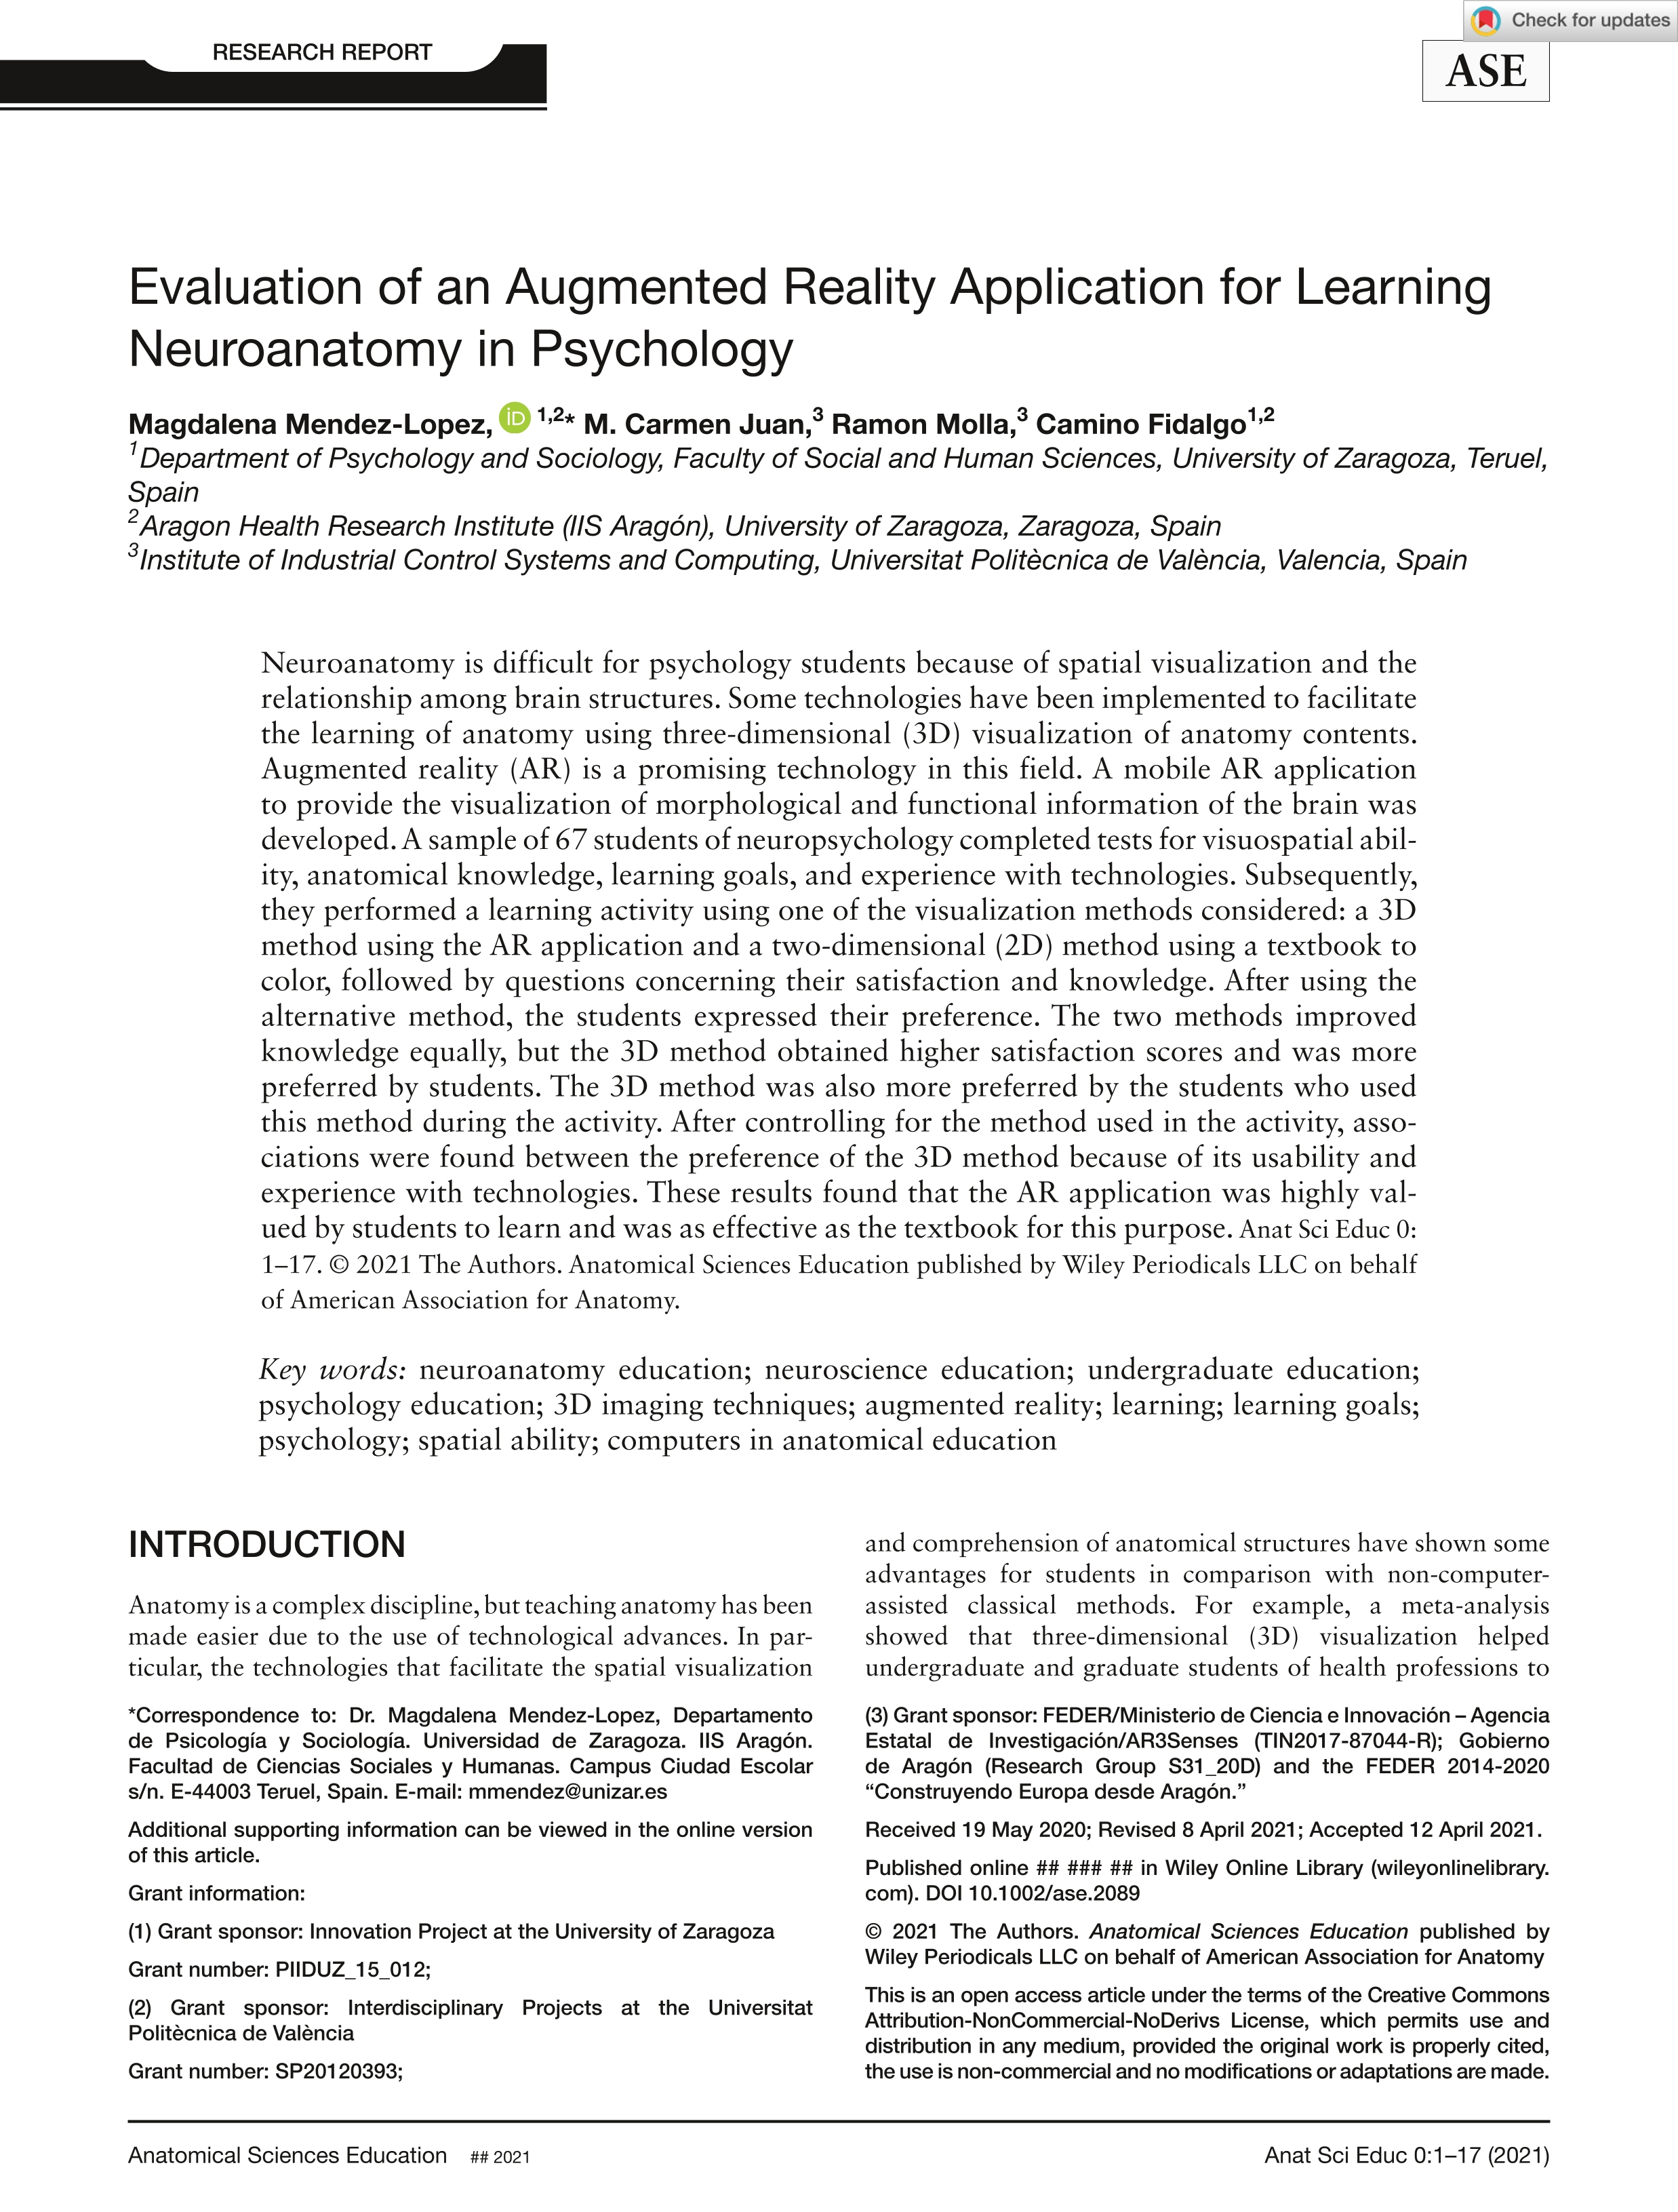 Evaluation of an augmented reality application for learning neuroanatomy in psychology